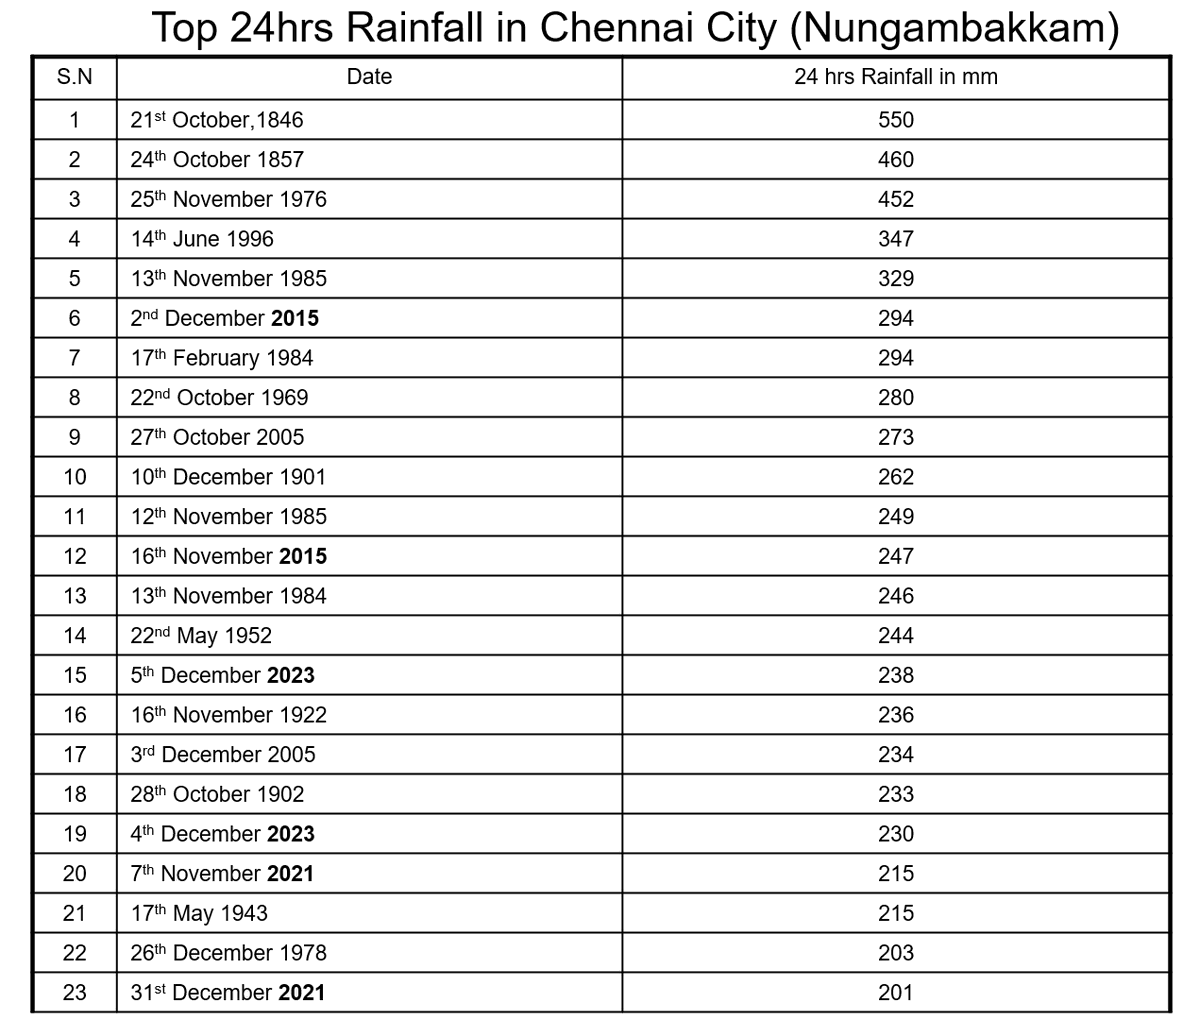 If Chennai were to experience the same rainfall as in 1846, the entire city could resemble like Athipattu Village. #ChennaiRainfall #CycloneMichuang